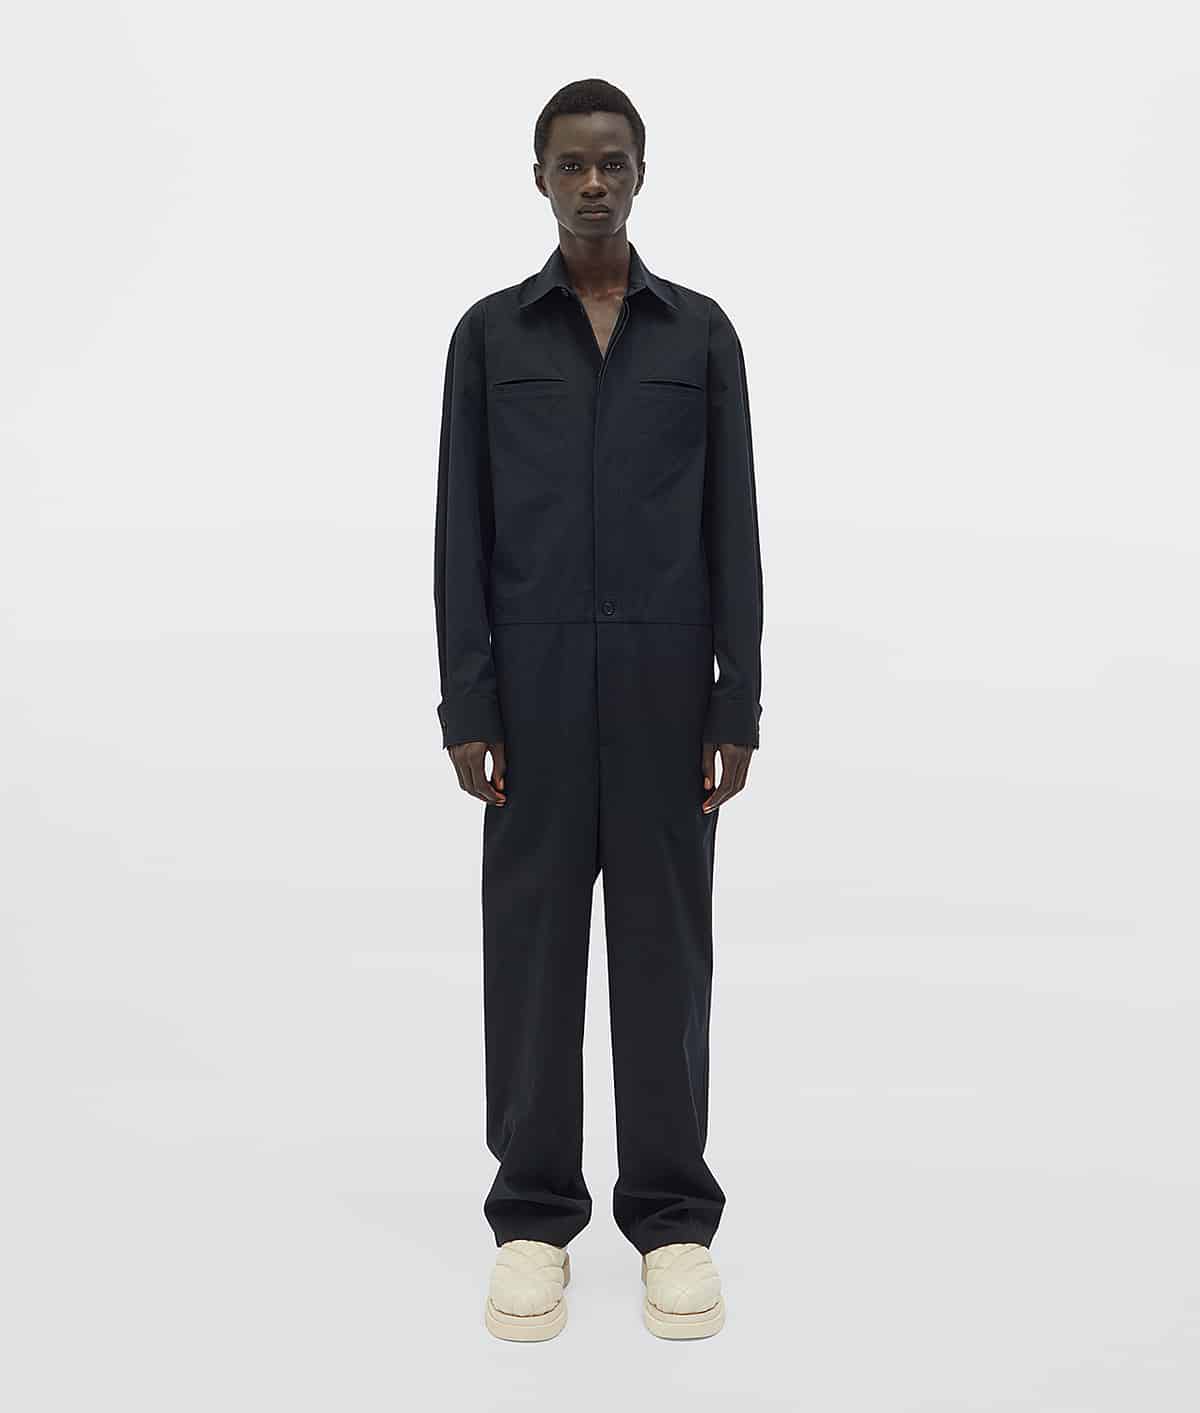 The 20 Best Jumpsuits for Men in 2021